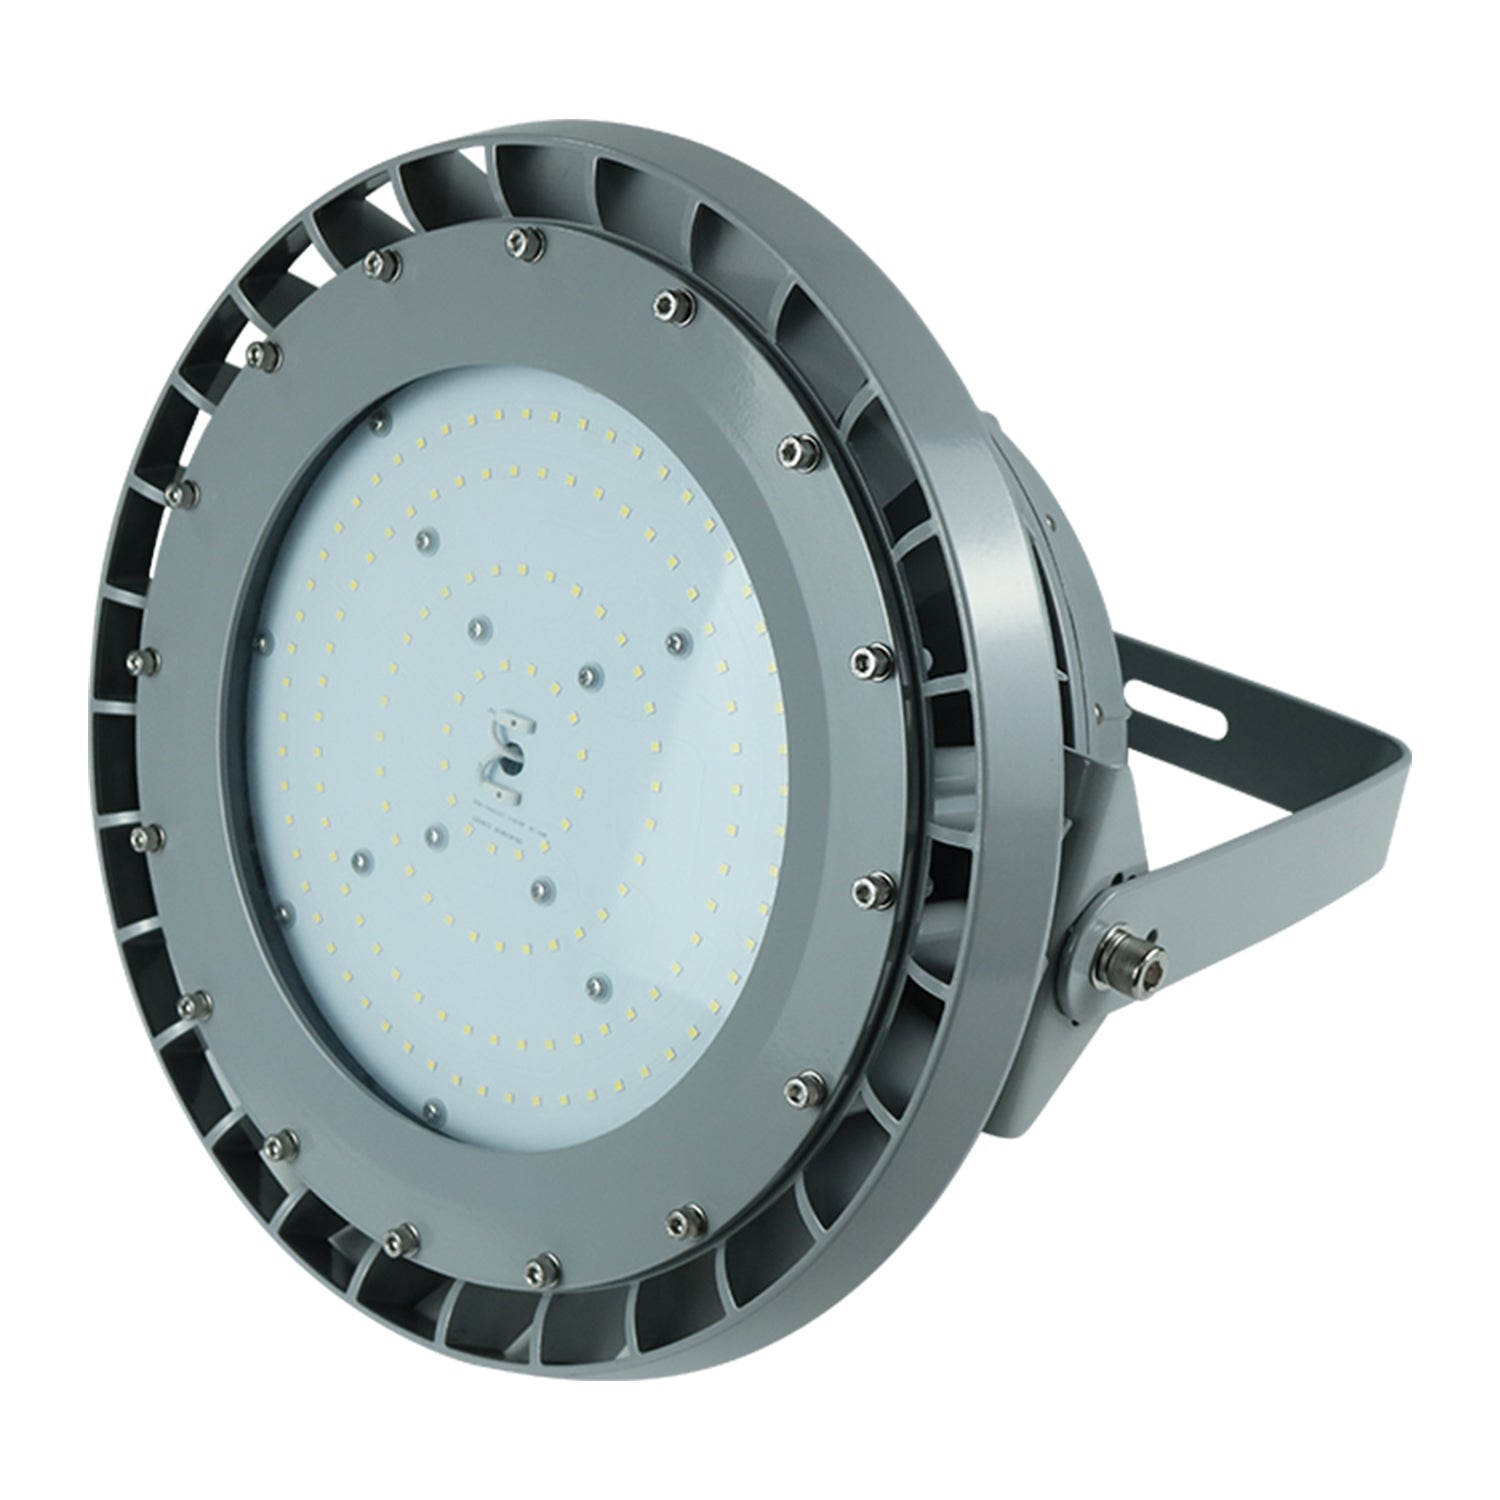 B Series 400W Dimmable LED Explosion Proof Round High Bay Light - 5000K, 56000LM, IP66 Rated for Hazardous Locations - Ideal for Oil &amp; Gas Refineries, Drilling Rigs, Petrochemical Facilities